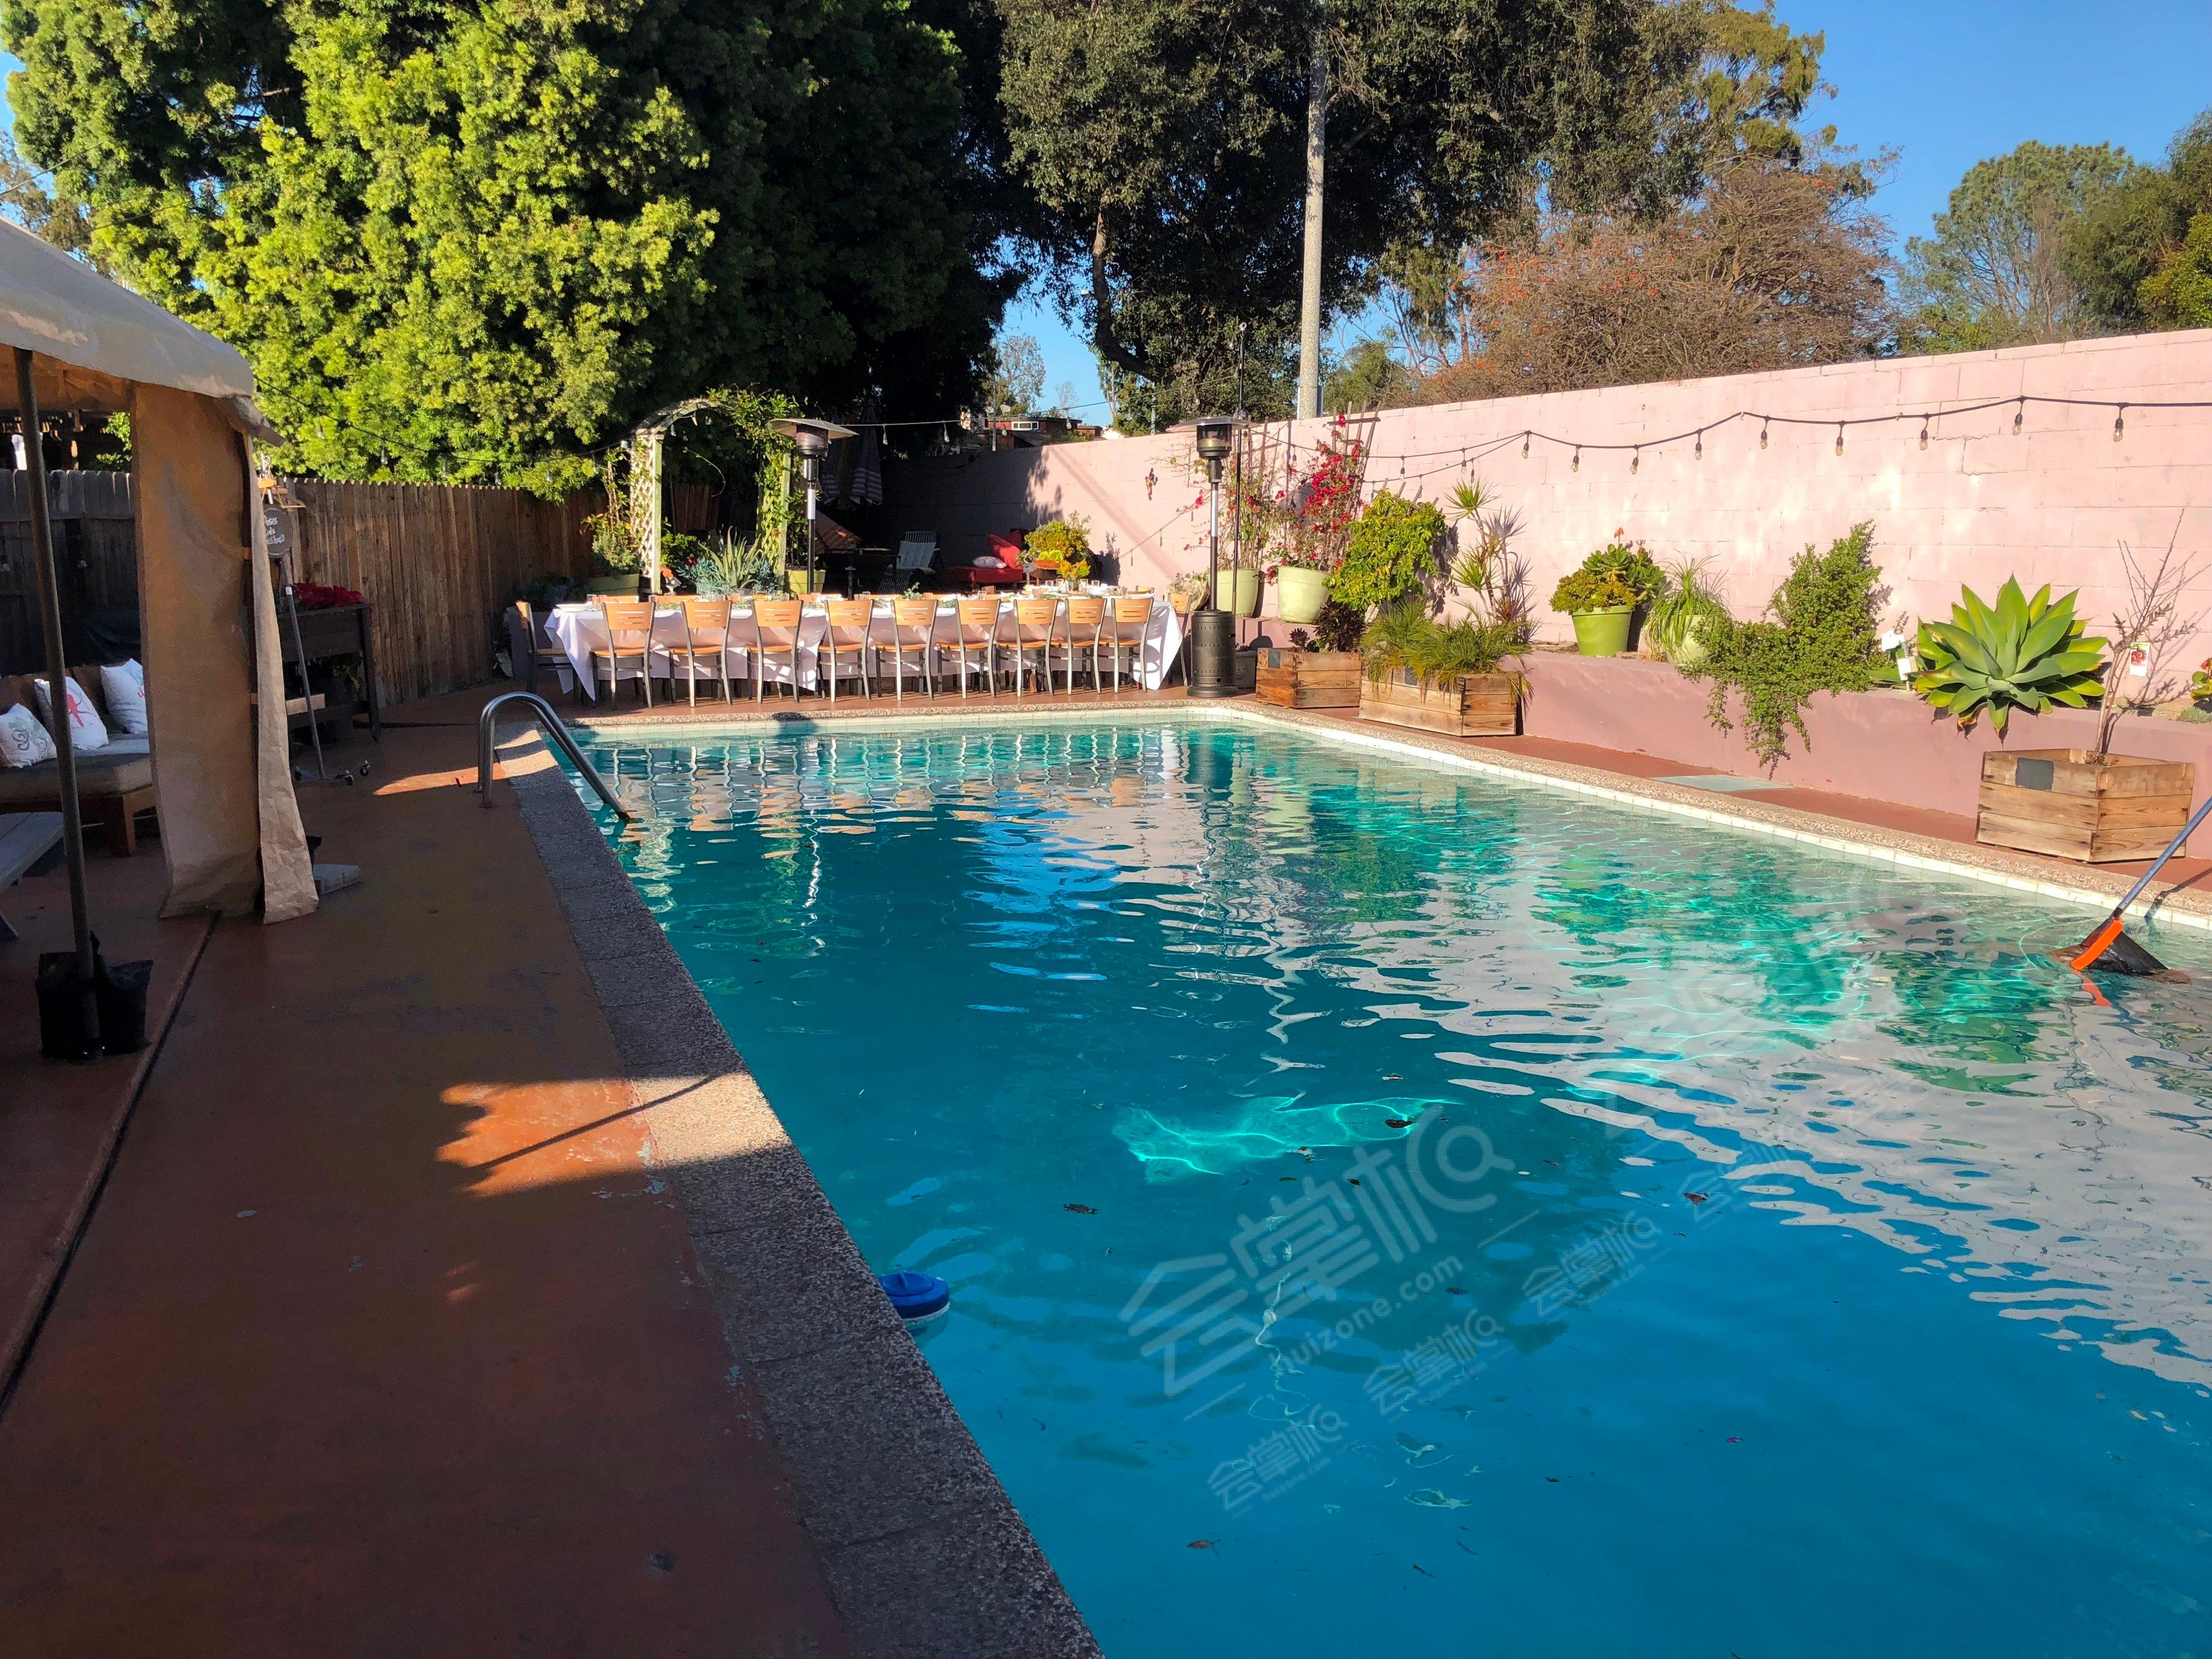 Pool Rental at Retro-Modern House Perfect for Small Outdoor Events